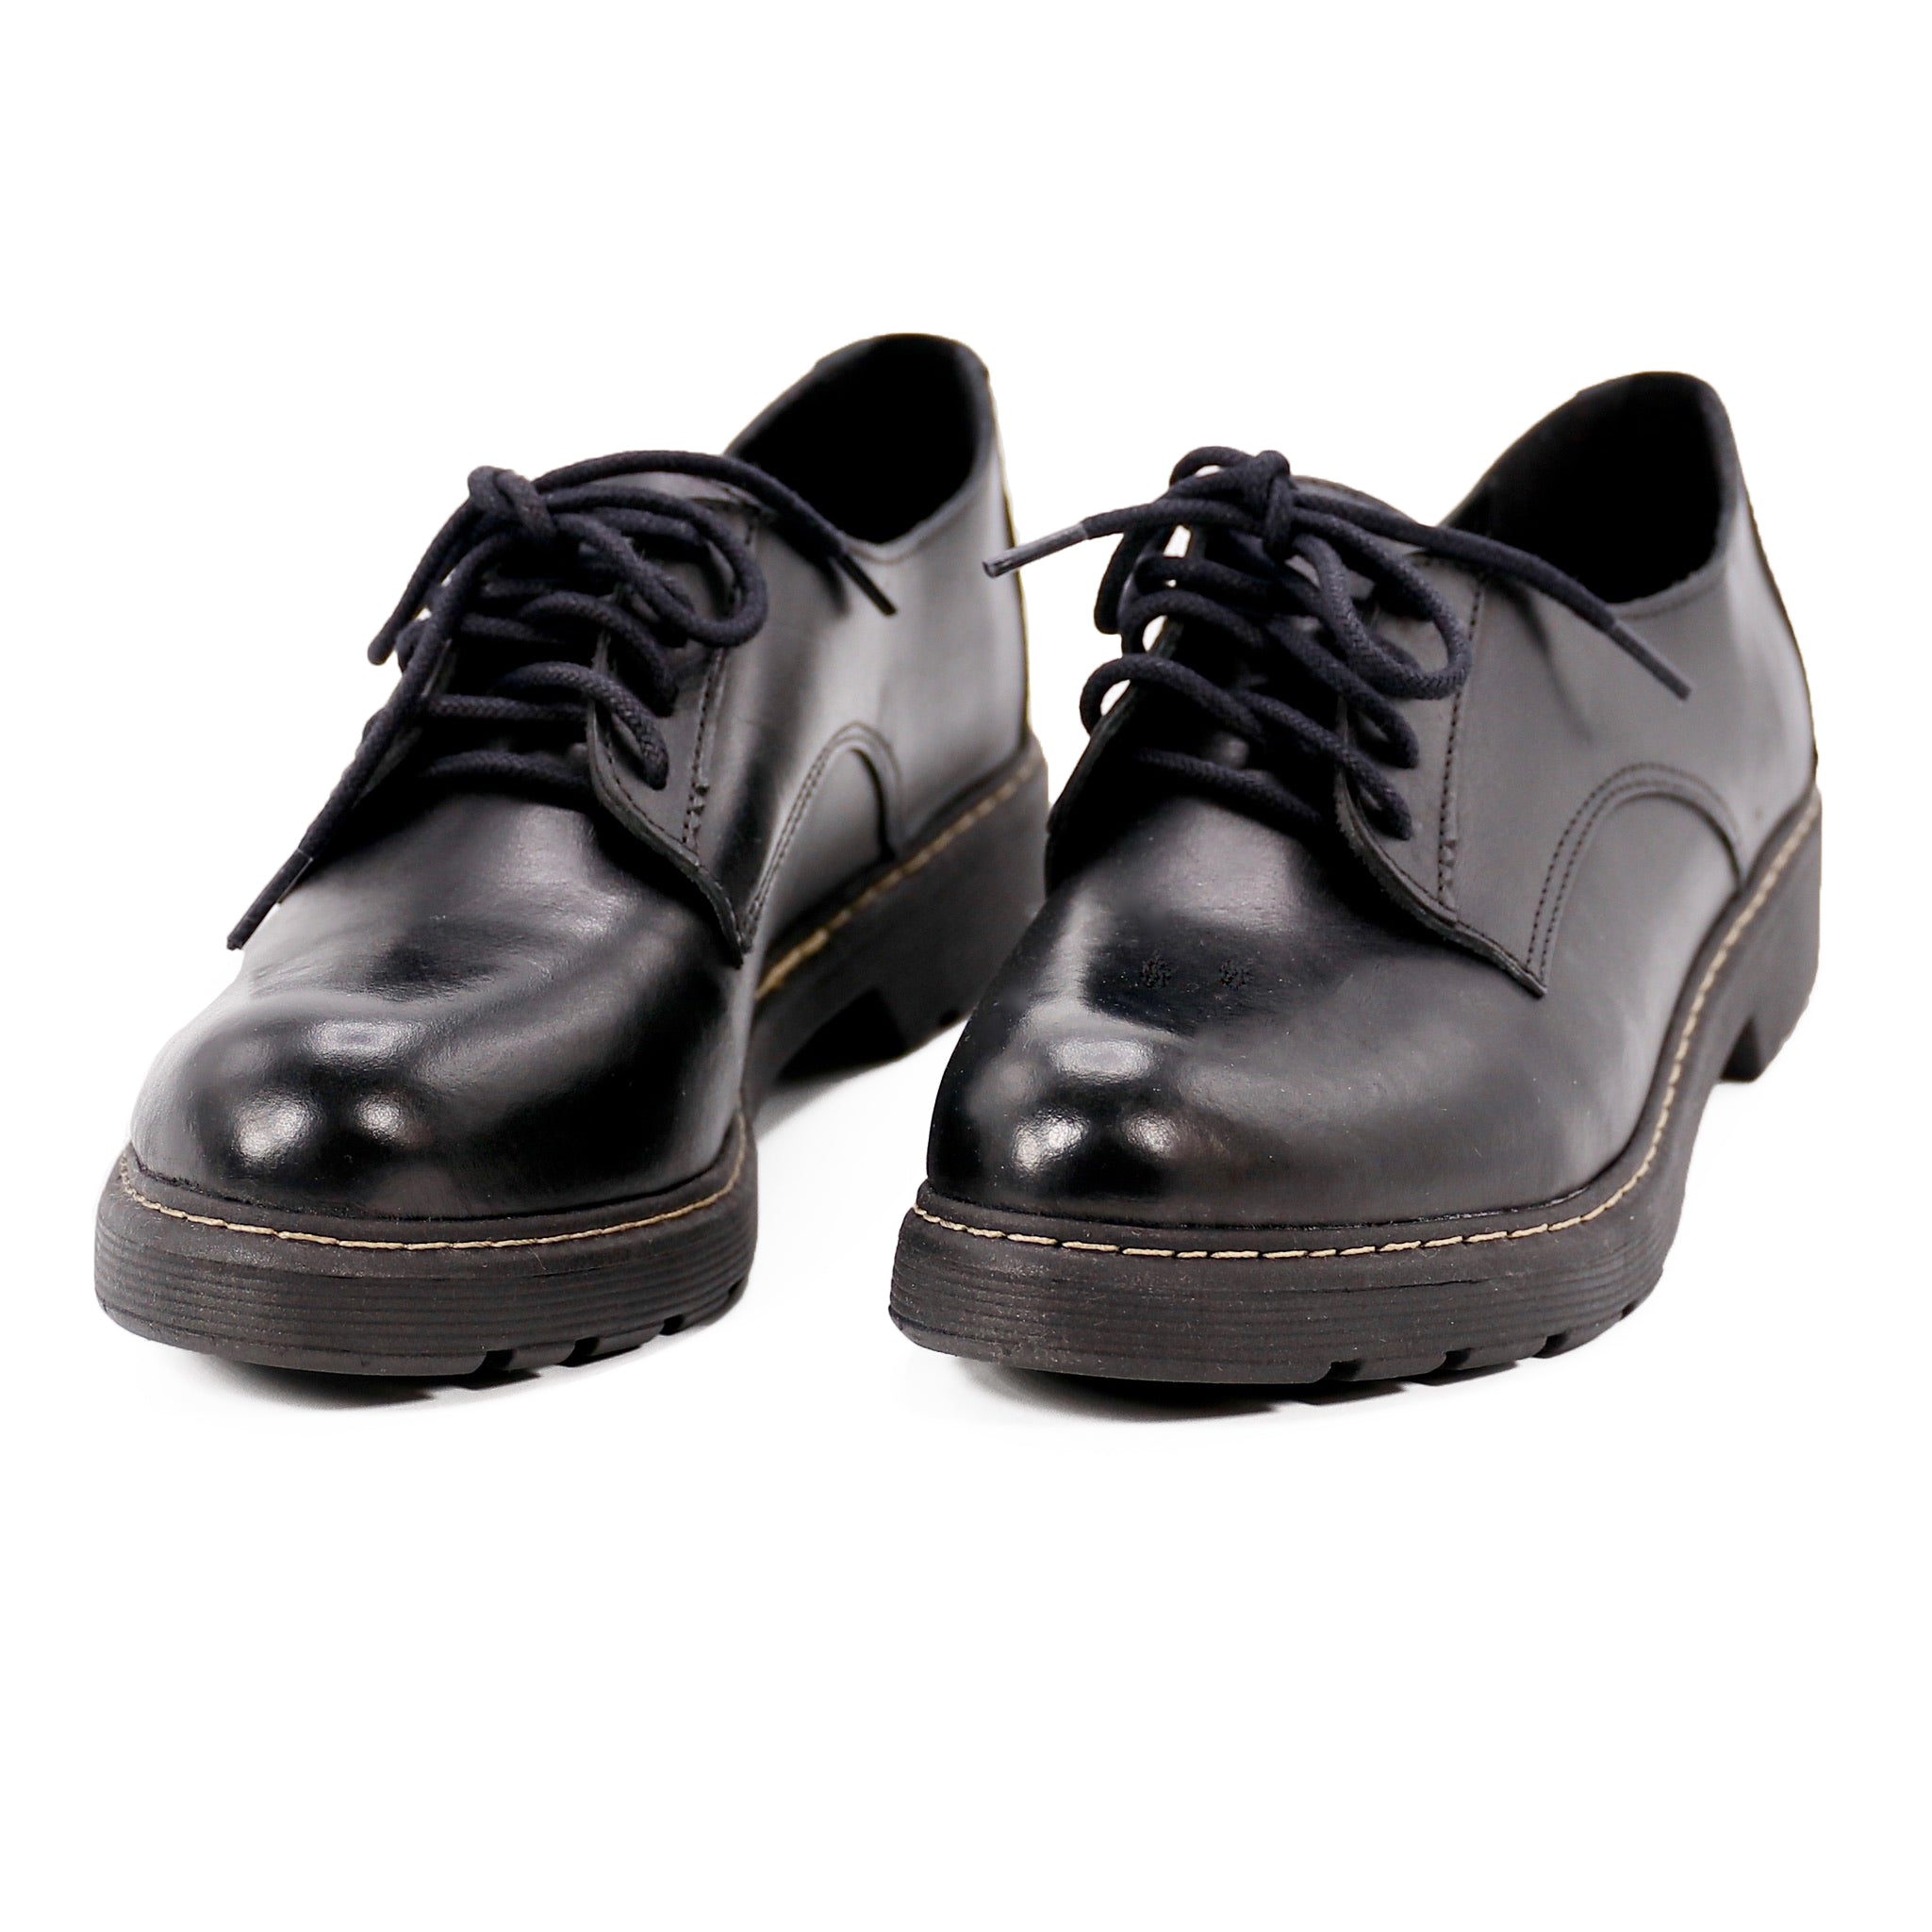 Women's Glossy Black Shoes by Designer 